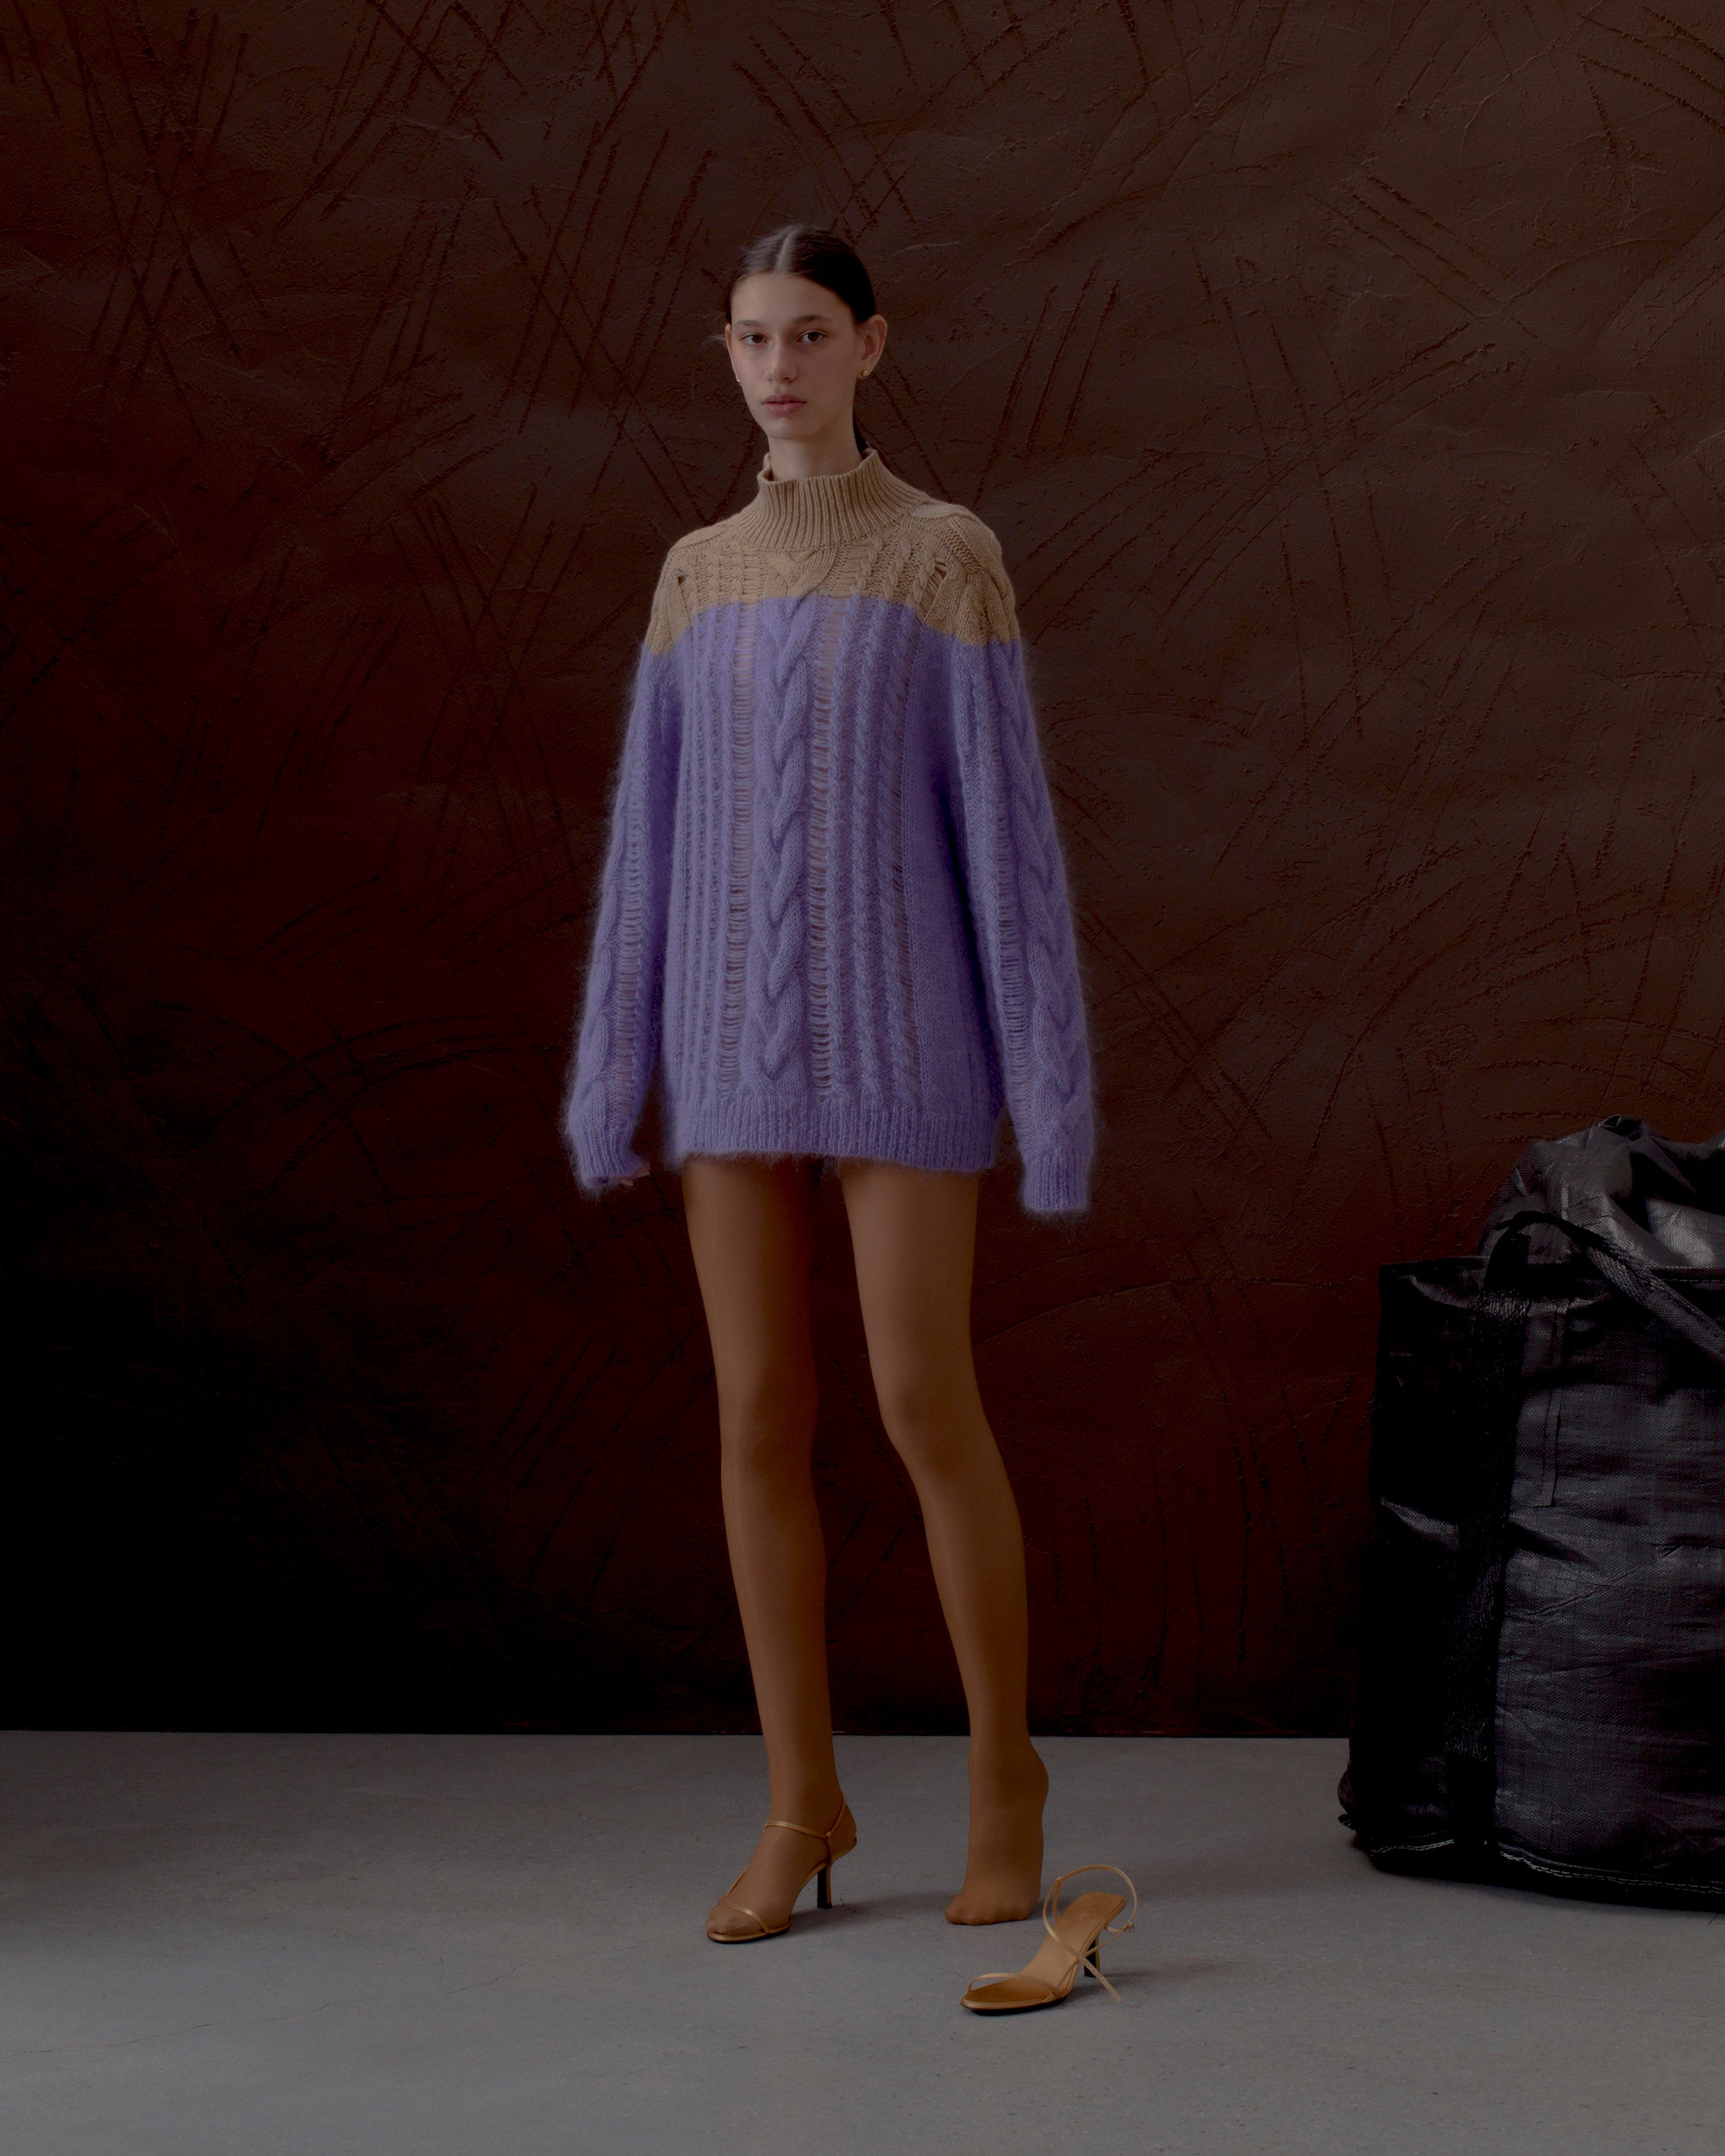 MOHAIR CABLE SWEATER [LAVENDER]